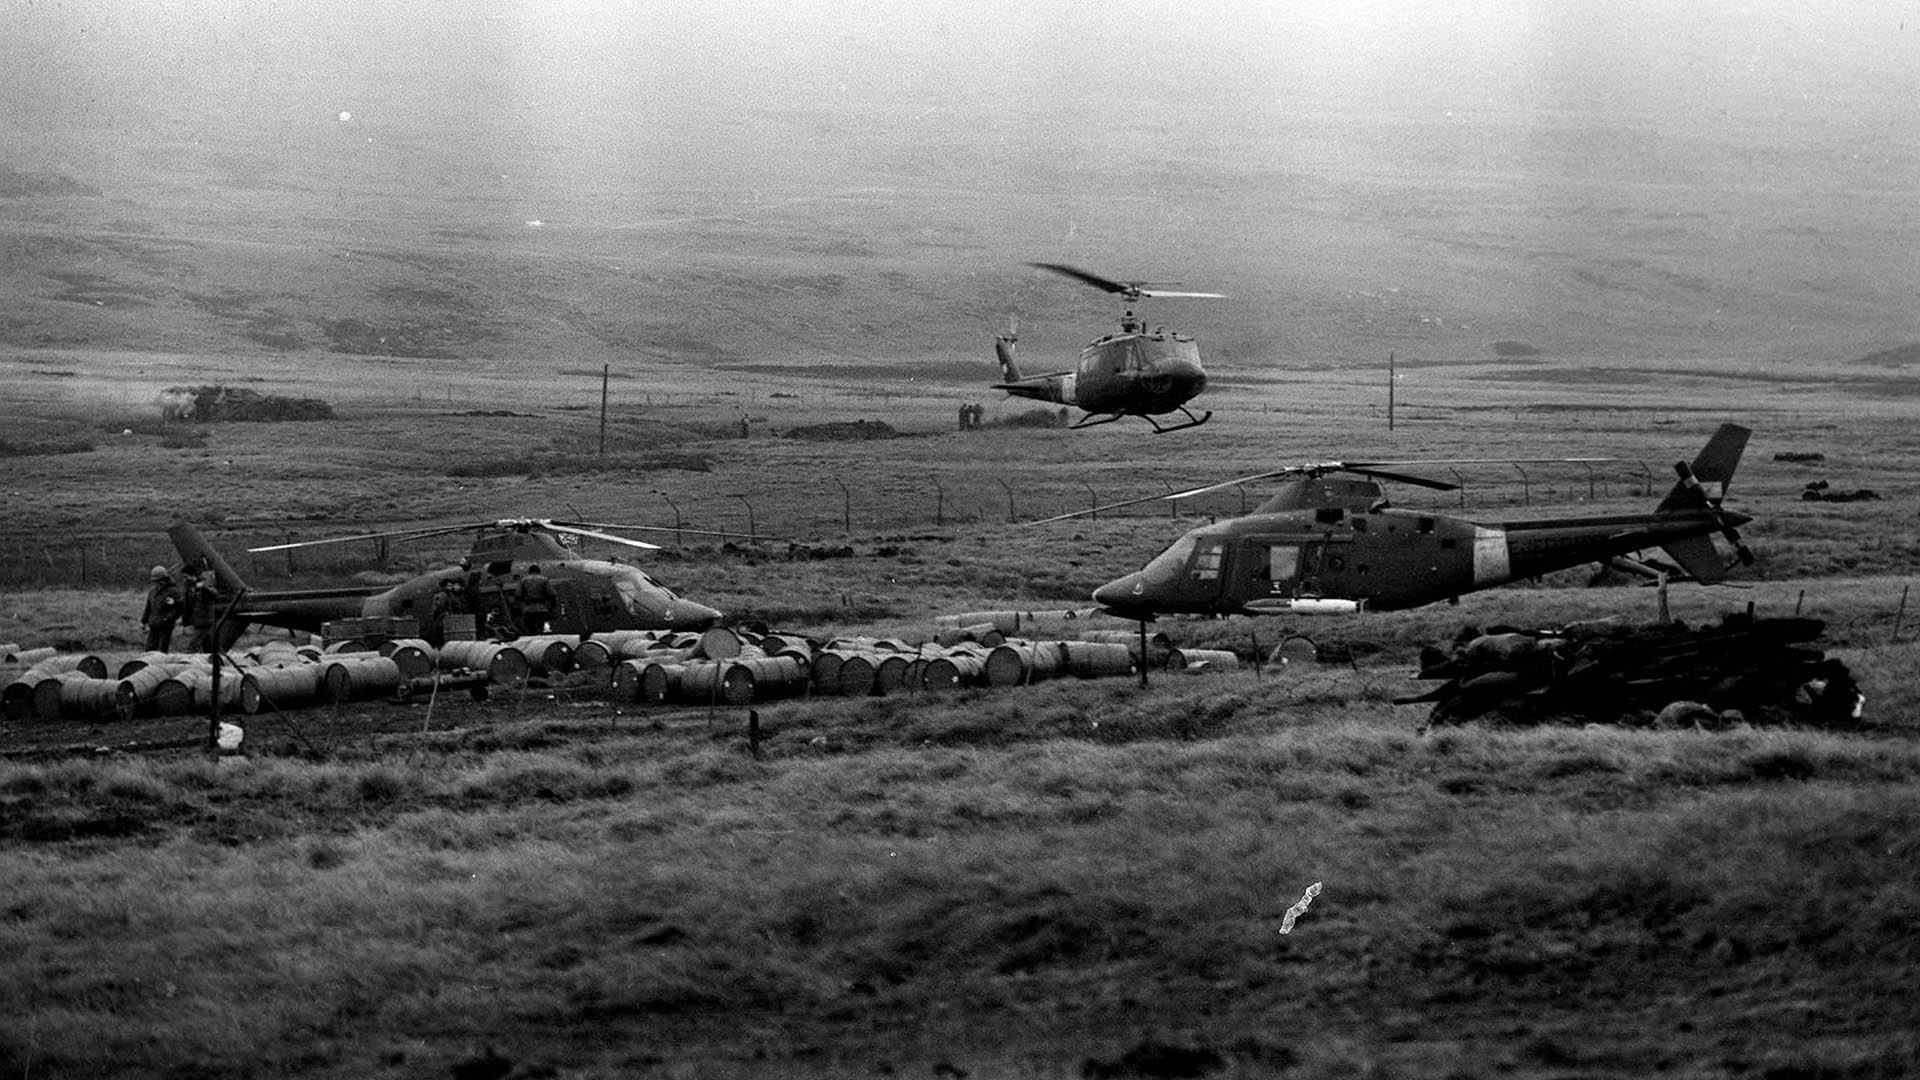 Argentine helicopters patrol rural areas (end of May 1982) of the Malvinas Islands (Eduardo Farré/ArchivoTélam)